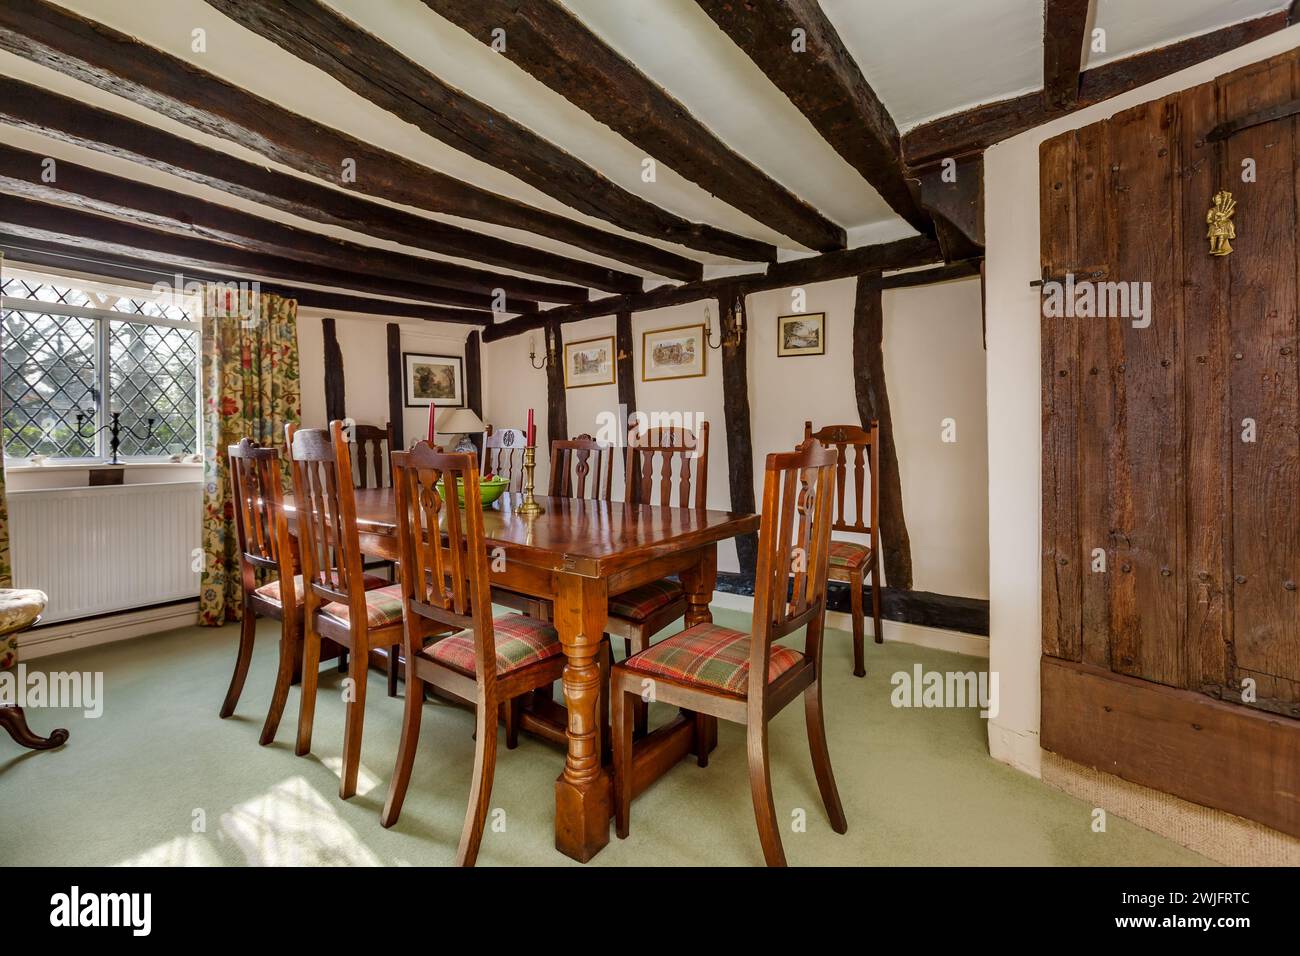 Dalham, Suffolk, England - Feb 19 2016: 16th Century english cottage dining room with exposed beams Stock Photo